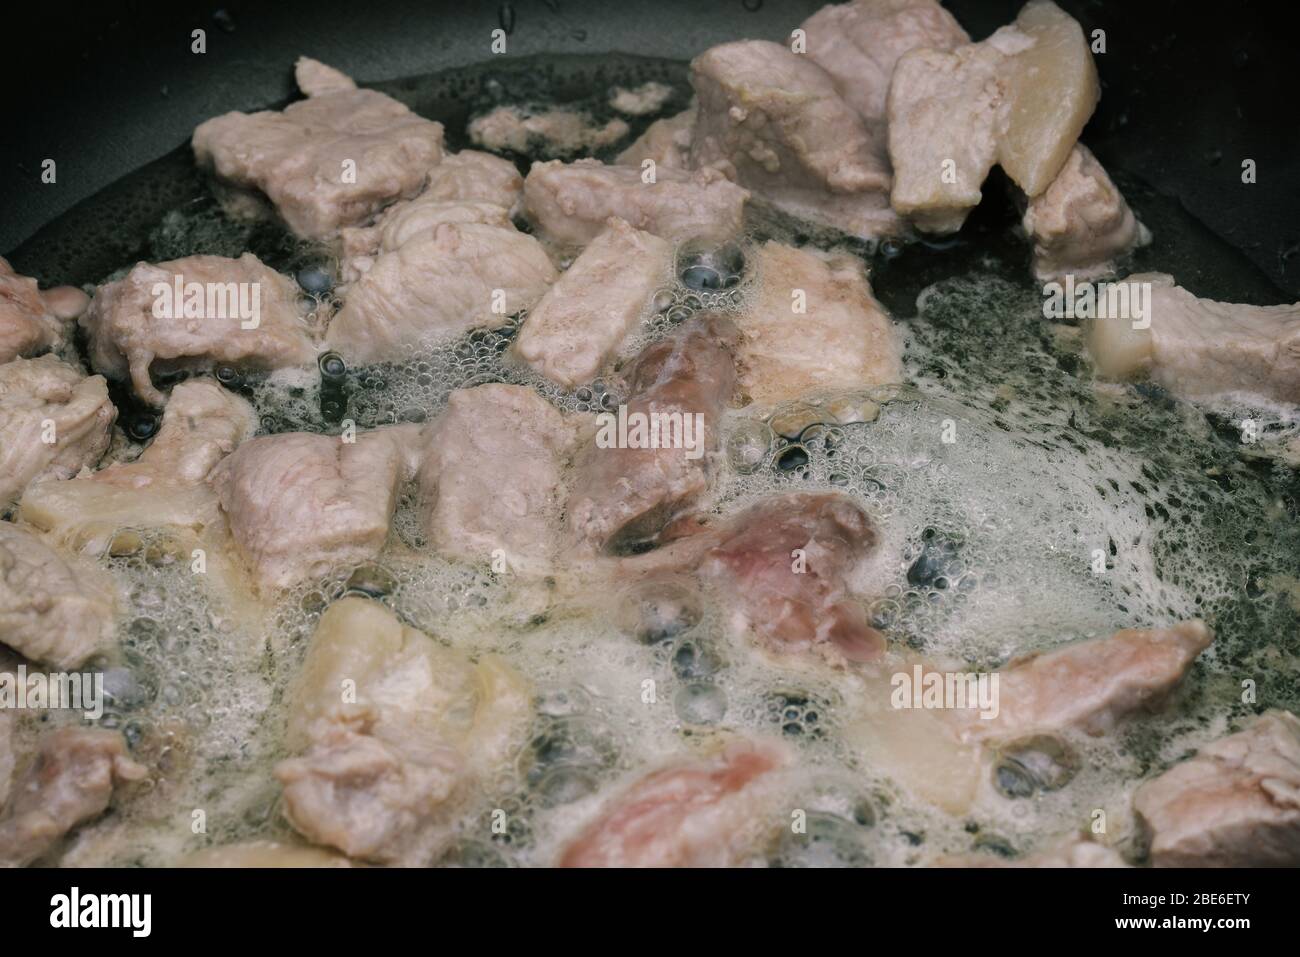 https://c8.alamy.com/comp/2BE6ETY/pieces-of-raw-meat-with-vegetable-oil-are-fried-in-a-pan-the-process-of-cooking-the-meat-is-cooked-in-a-pan-close-up-2BE6ETY.jpg